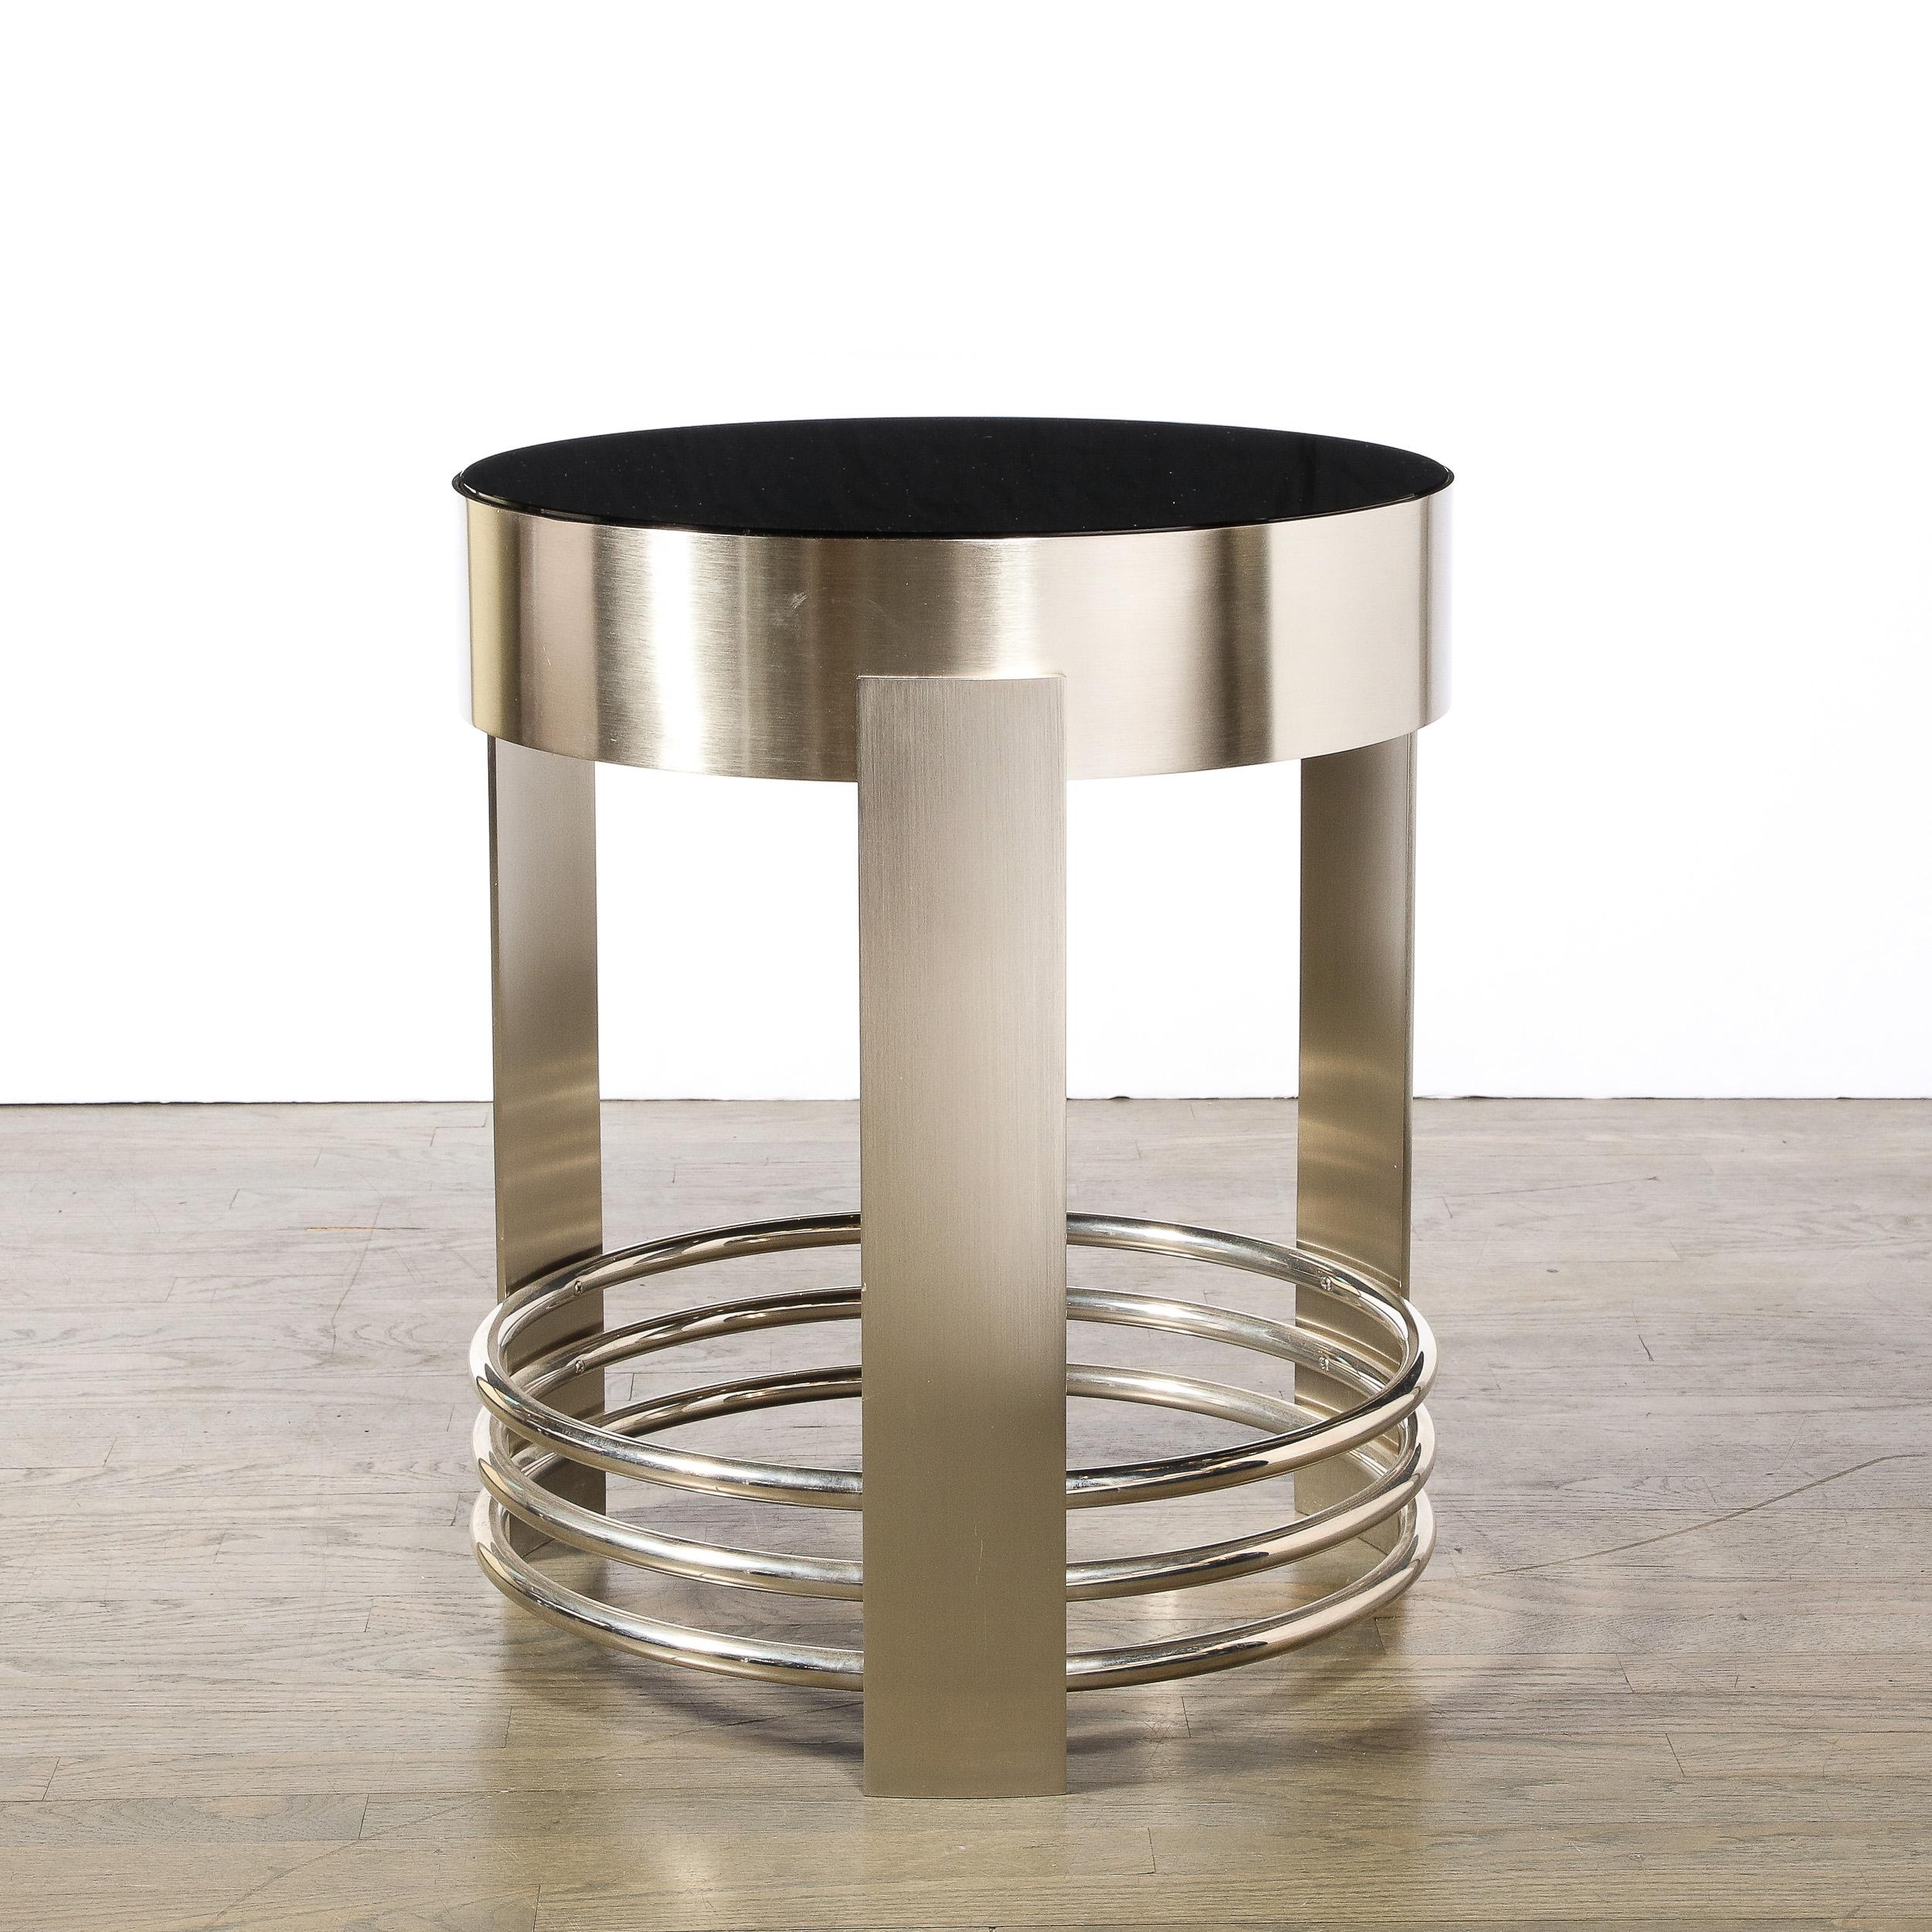 Art Deco Revival Occasional Table in Brushed Nickel with Polished Banding 3